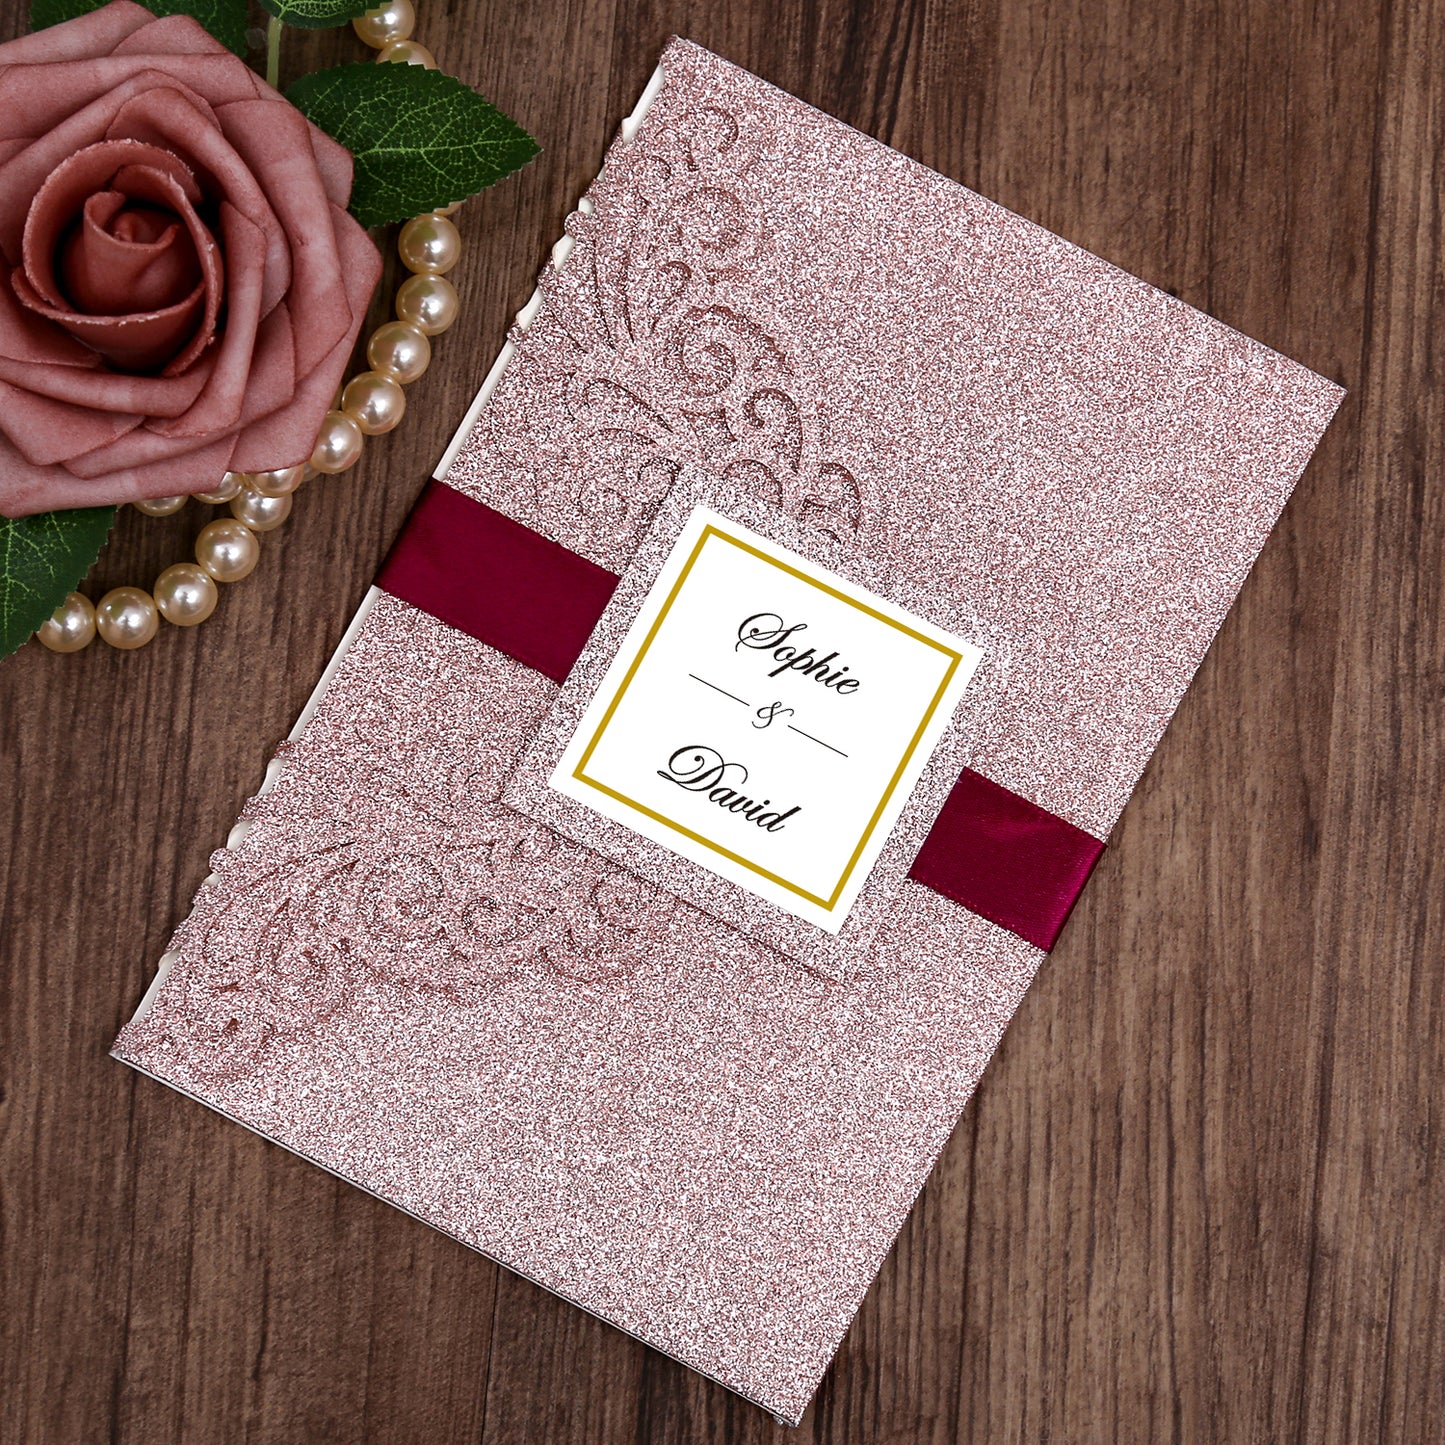 4.7 x7 inch Rose Gold Glitter Laser Cut Wedding Invitations With Envelopes Kit Hollow Rose Pocket And Burgundy Ribbon Belly Band for Wedding Bridal Shower Engagement Invite